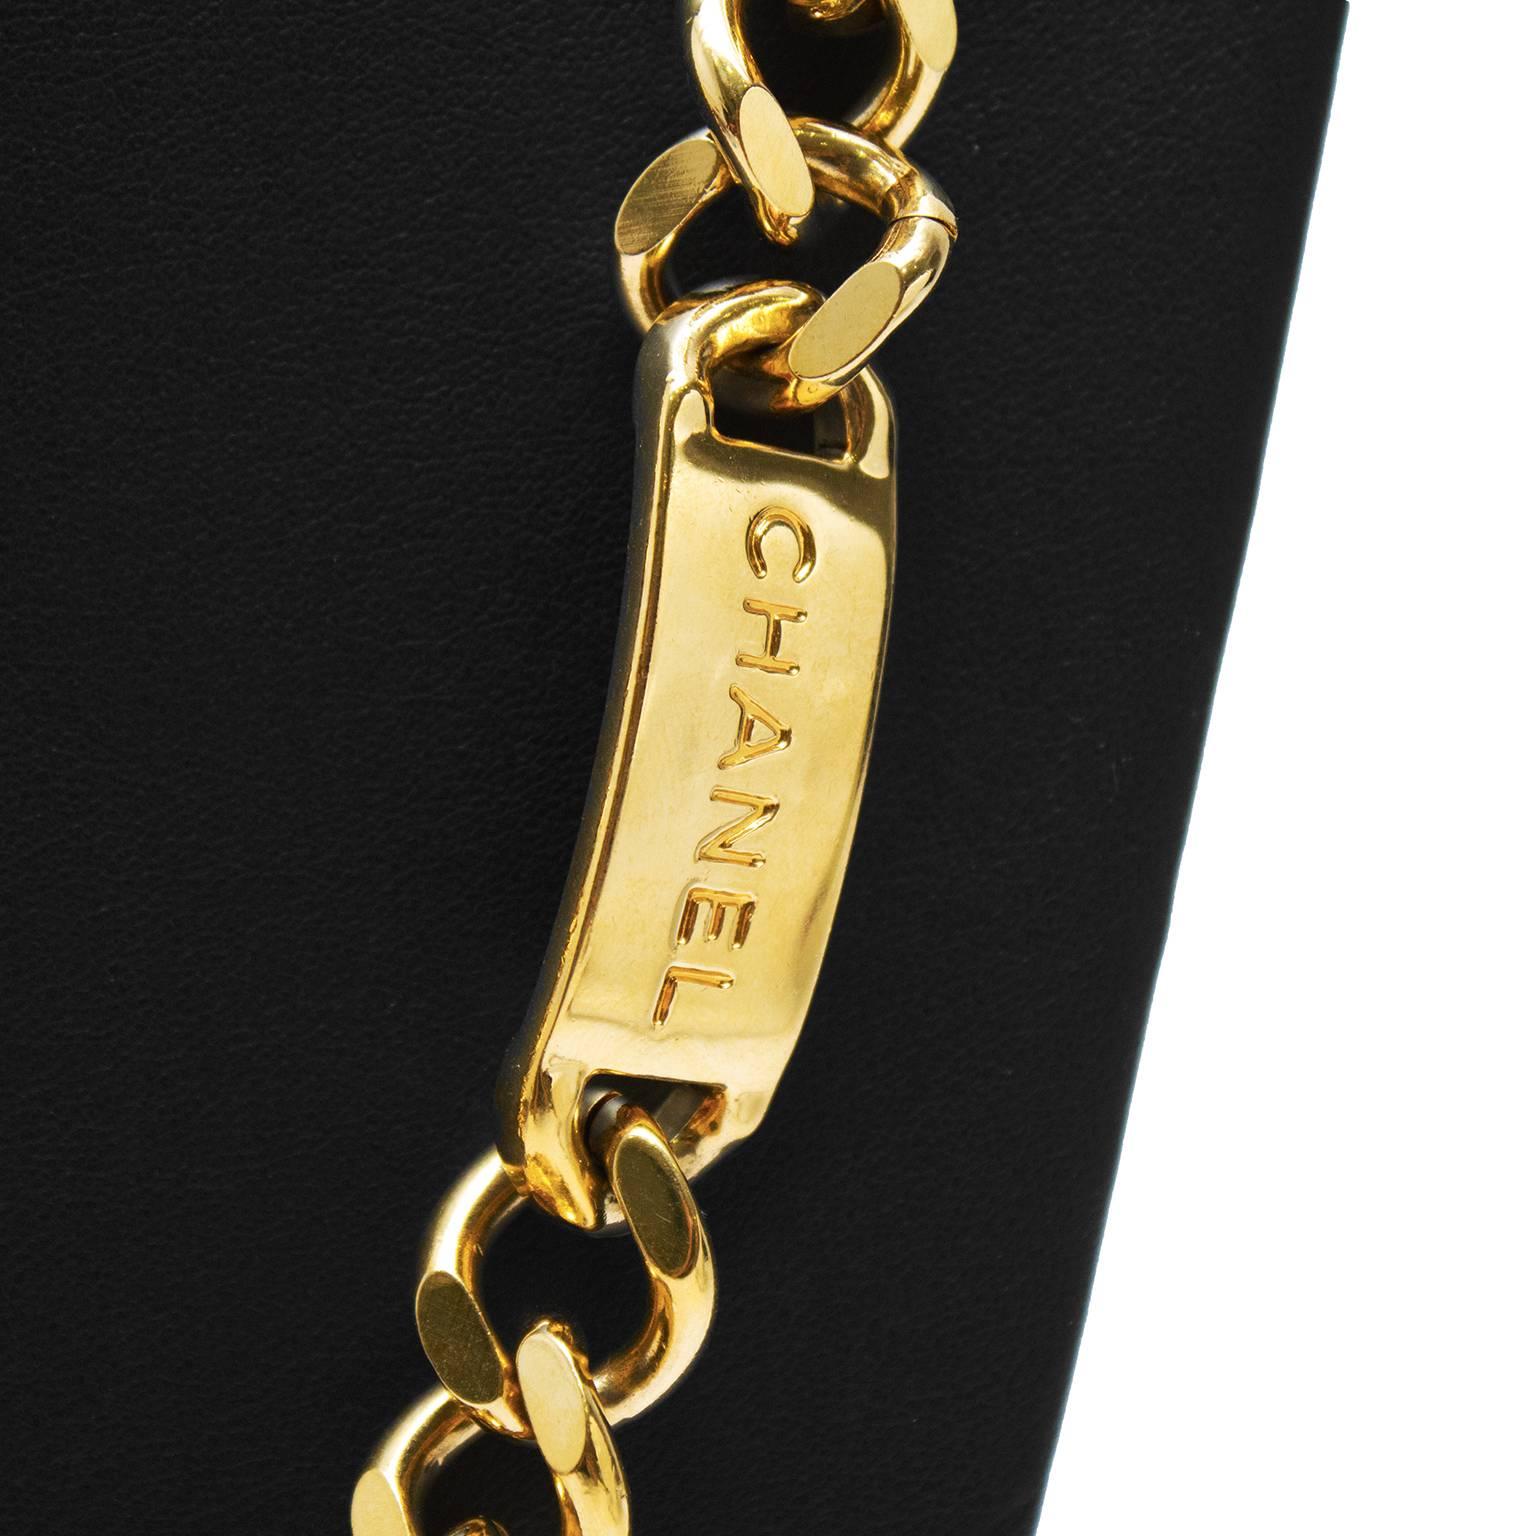 Chunky flat goldtone chain link belt or necklace from the 1980's. The chain has a CHANEL rectangular link on it and a stamped CC coin attached to one end with a hinge clasp. Closes with a hook and is adjustable. In excellent condition. 

Length